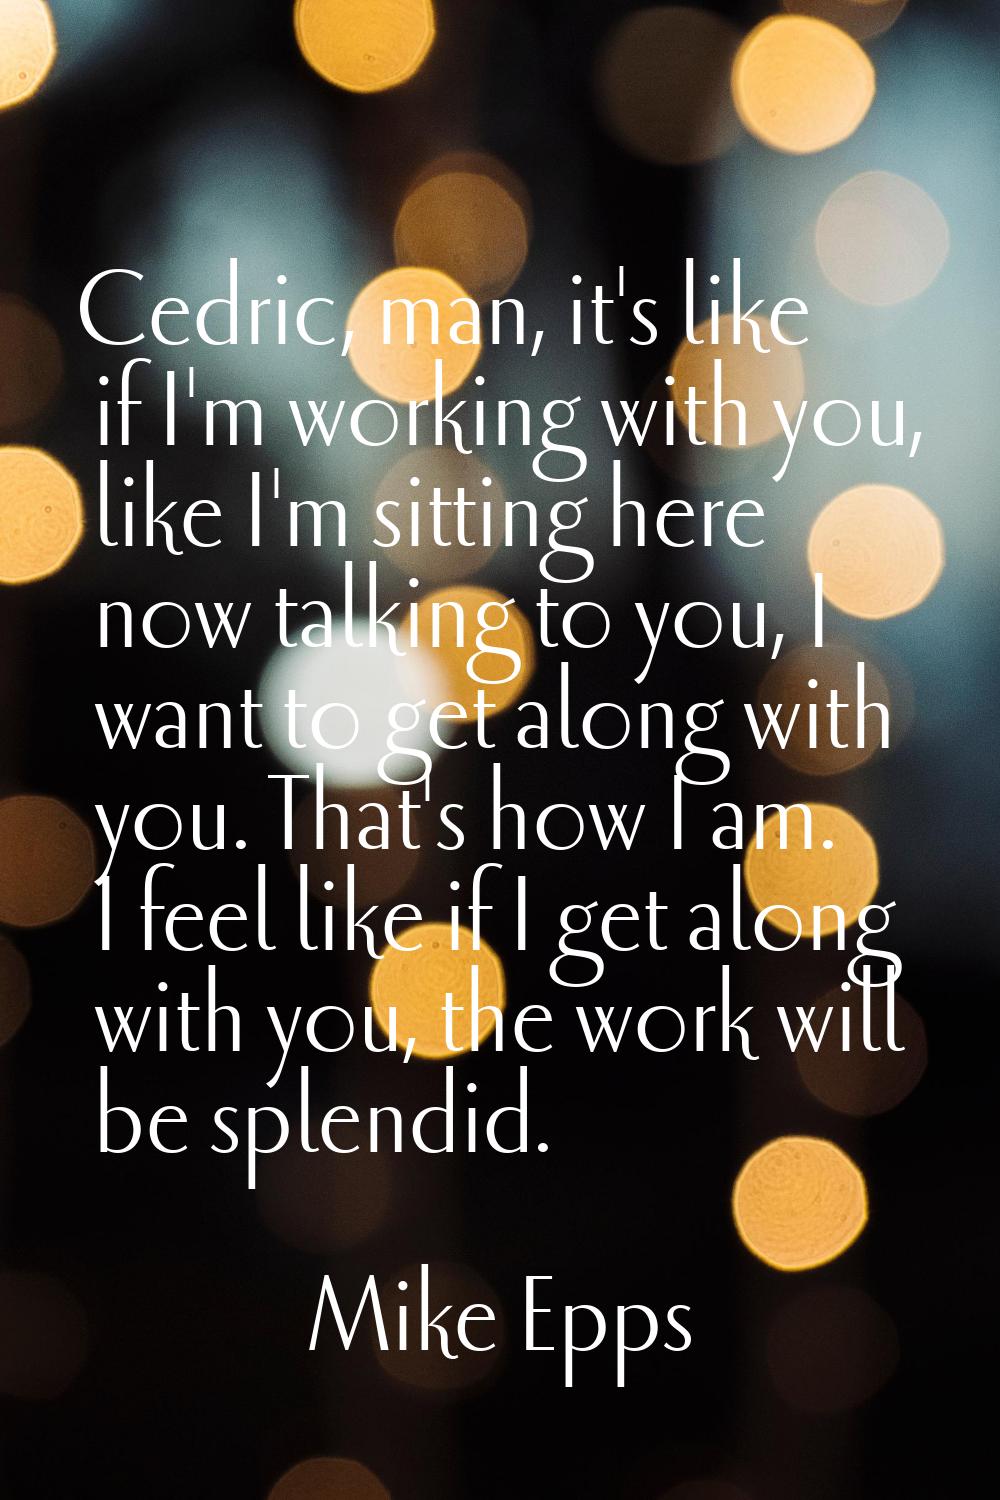 Cedric, man, it's like if I'm working with you, like I'm sitting here now talking to you, I want to